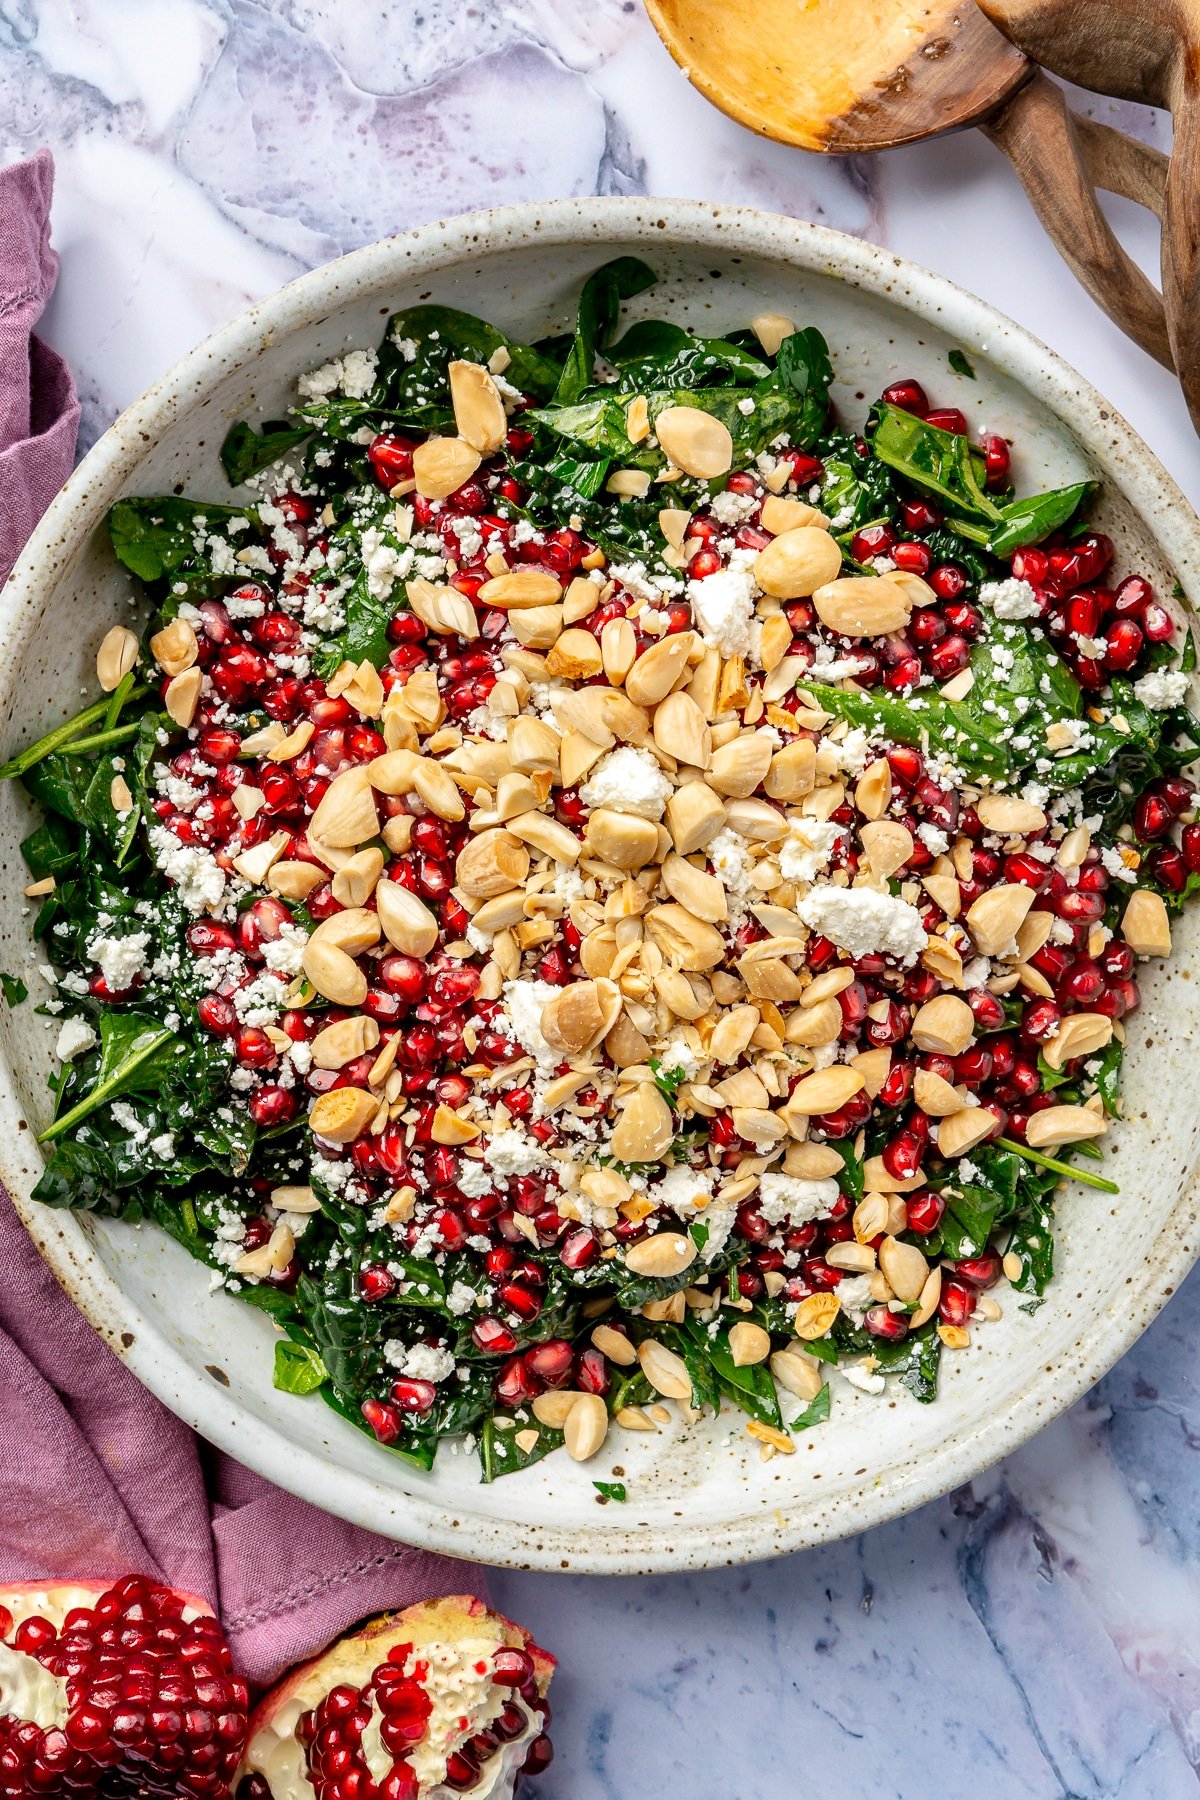 The remaining ingredients, including pomegranate seeds and chopped almond, have been added to the top of the kale.